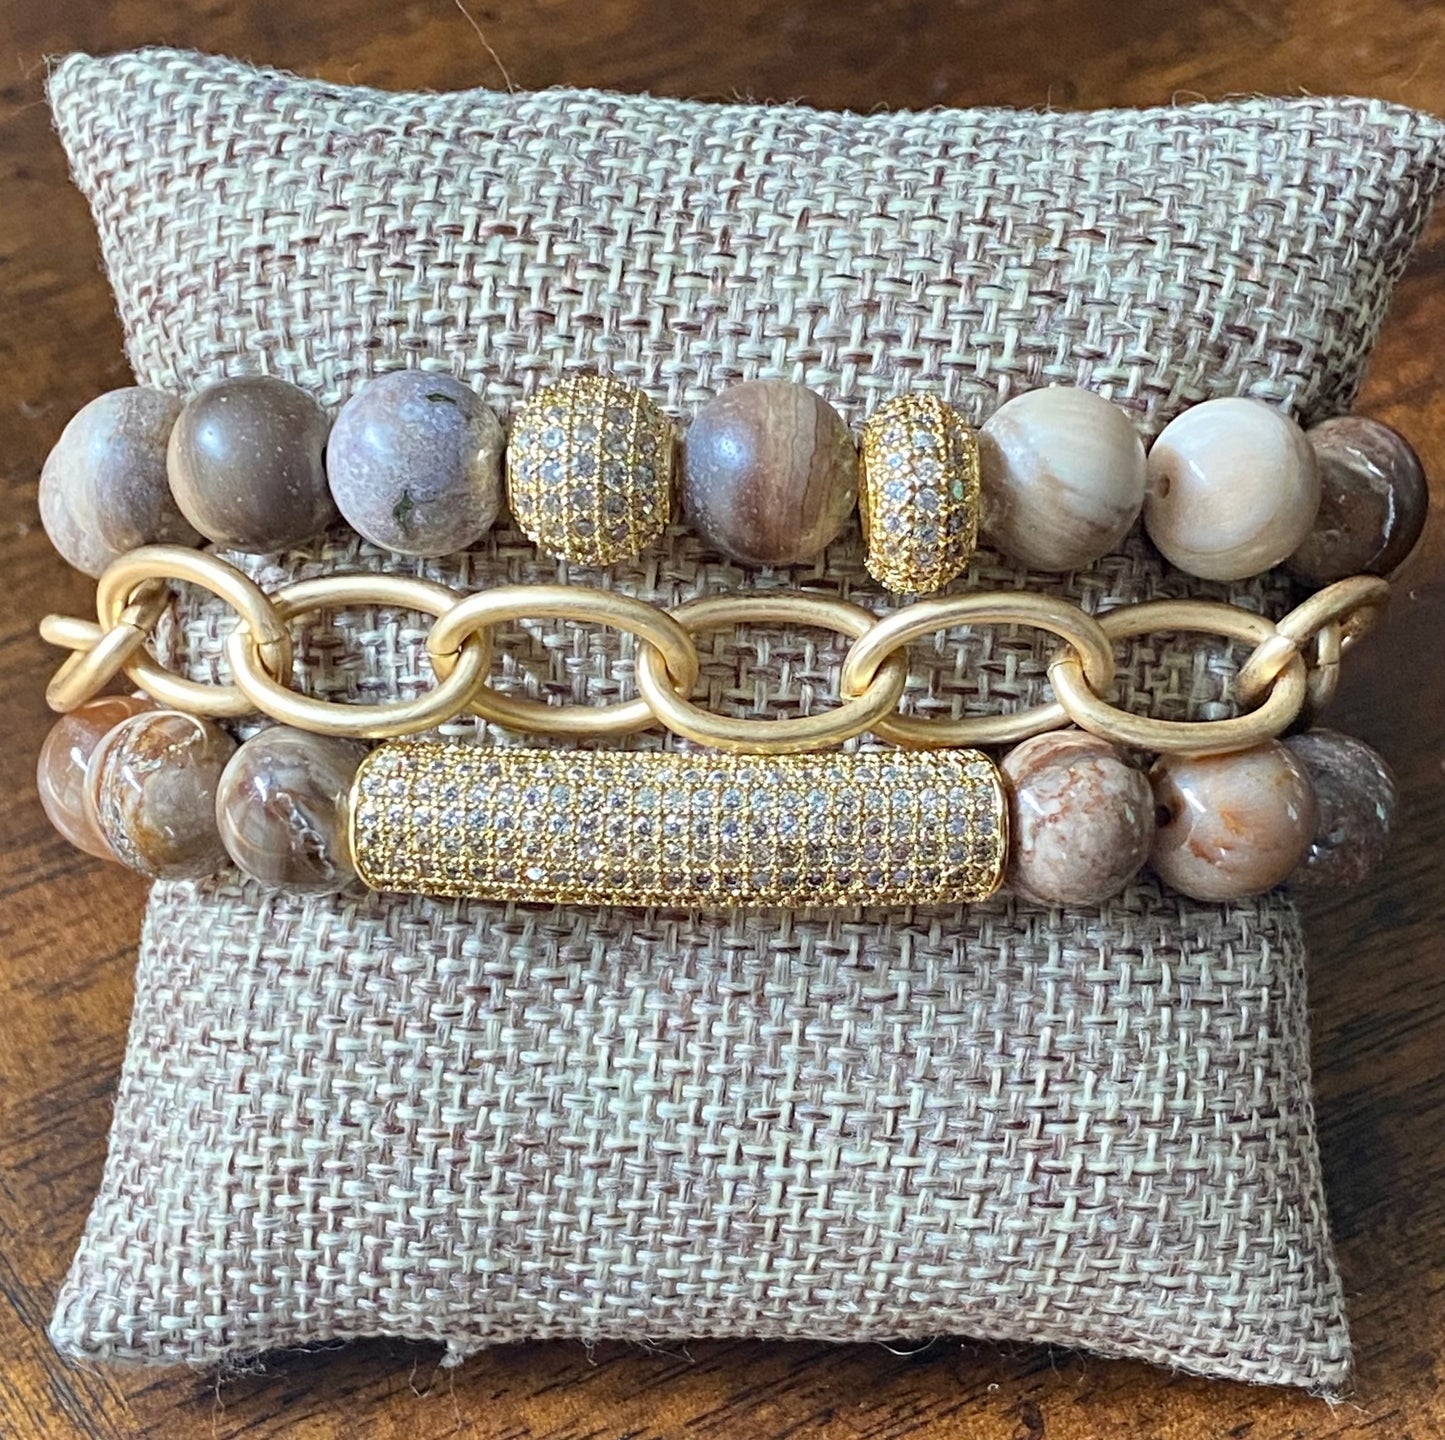 Petrified Wood and Gold Bracelet Stack